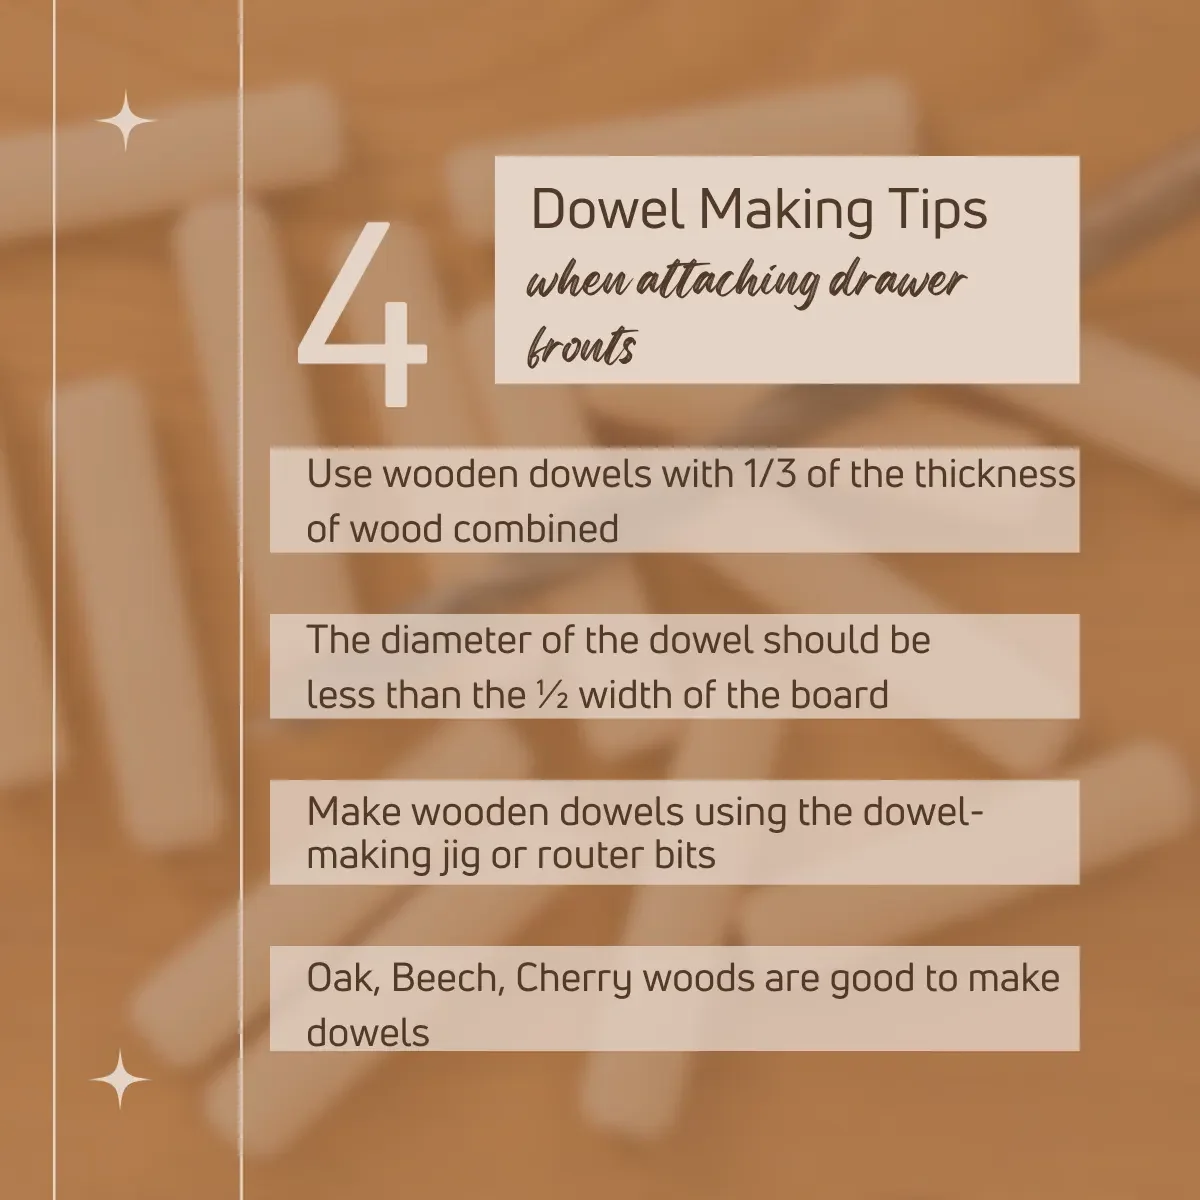 Dowel making tips when attaching drawer fronts